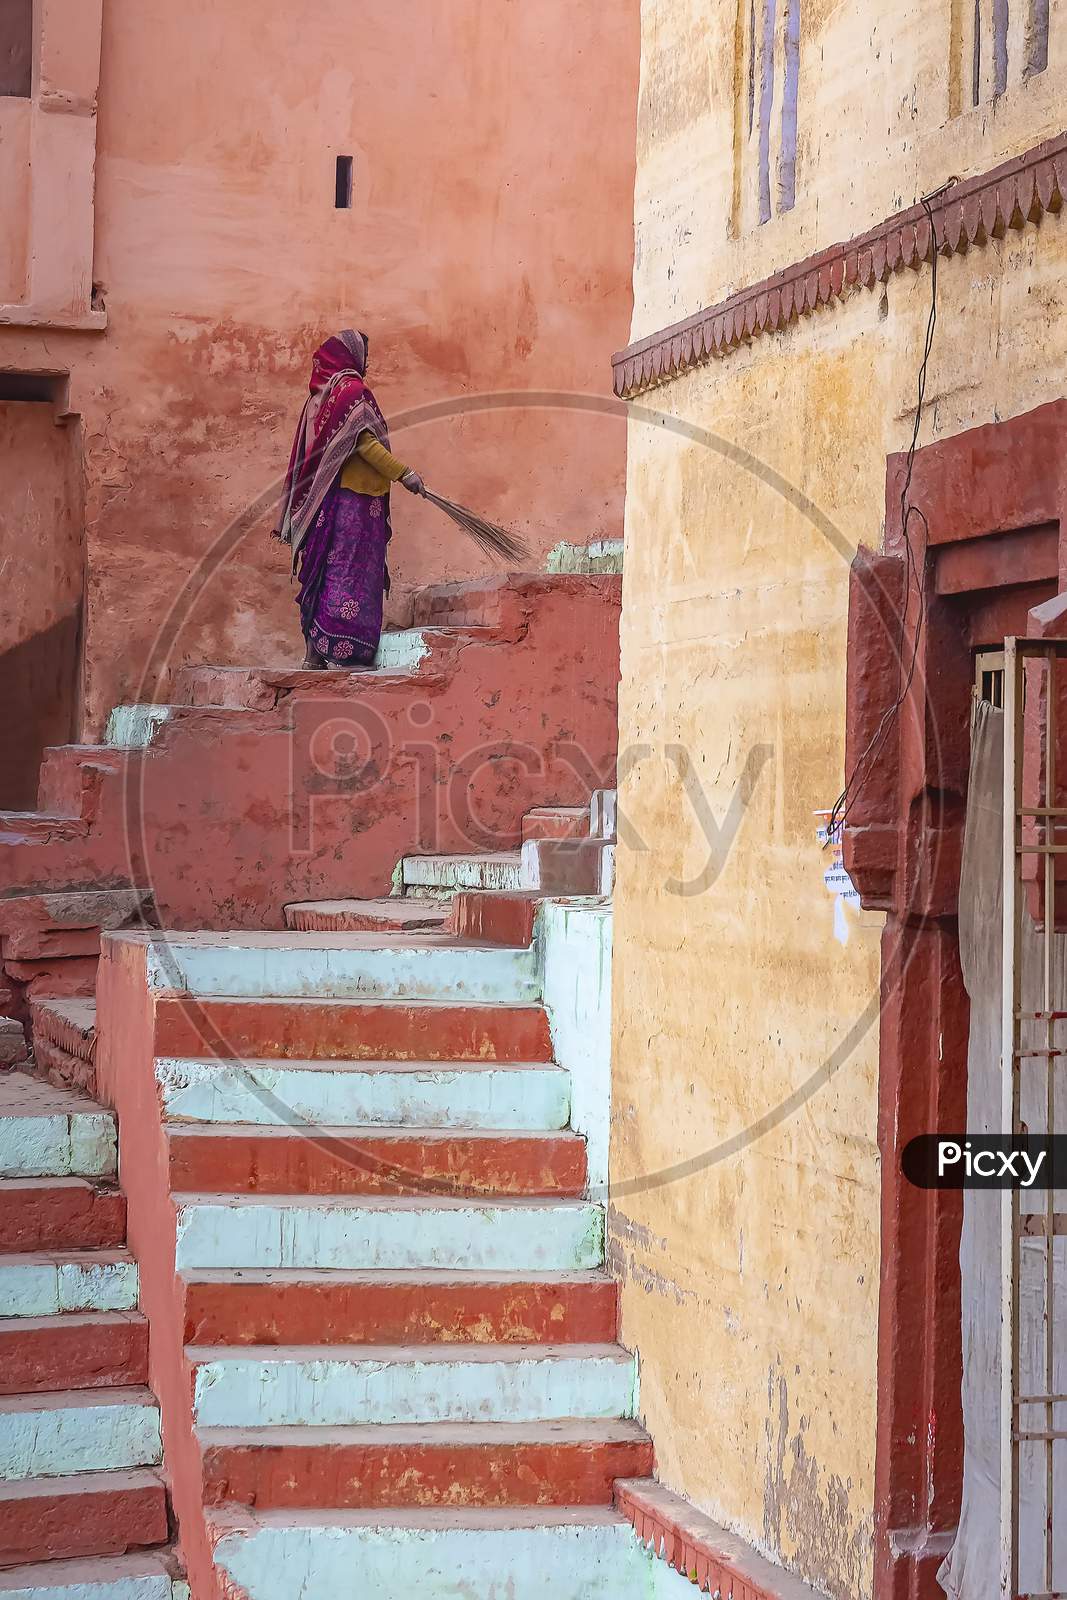 A Cleaning lady sweeps the street in front of her house in Varanasi